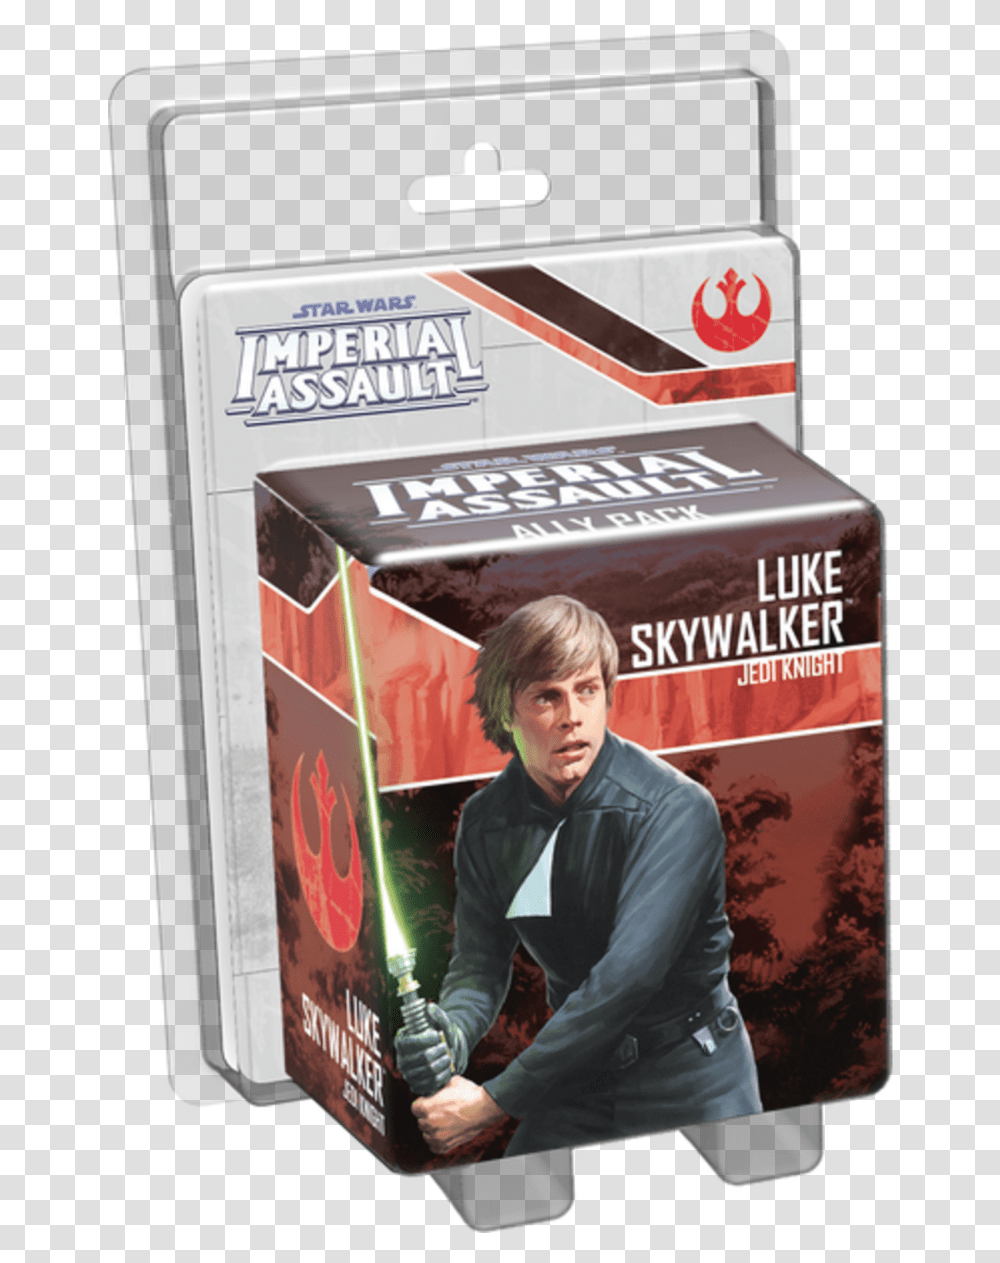 Chewbacca Ally Pack Star Wars Imperial Assault Star Wars Imperial Assault Ahsoka Tano, Person, Human, Electronics, Text Transparent Png